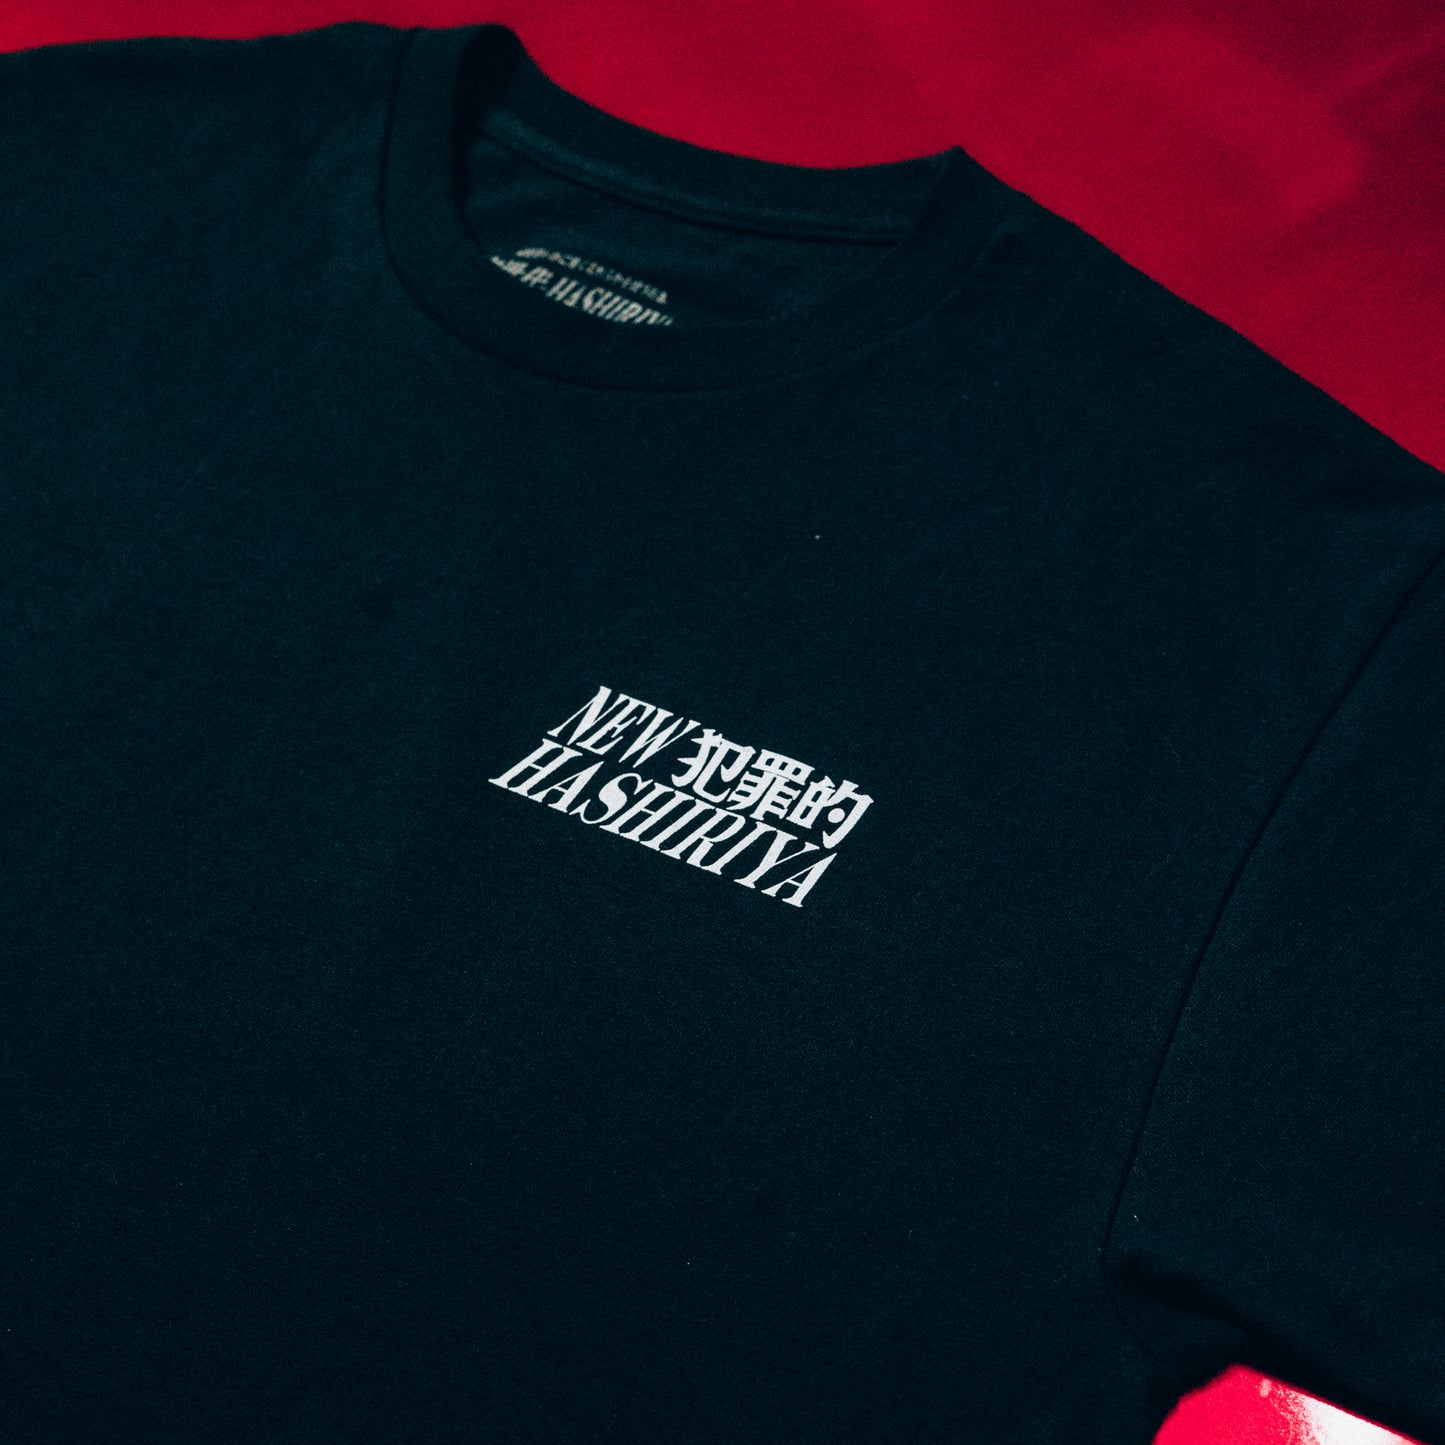 [𝙎𝙊𝙇𝘿 𝙊𝙐𝙏] 'Touge is not a crime' Black Tee